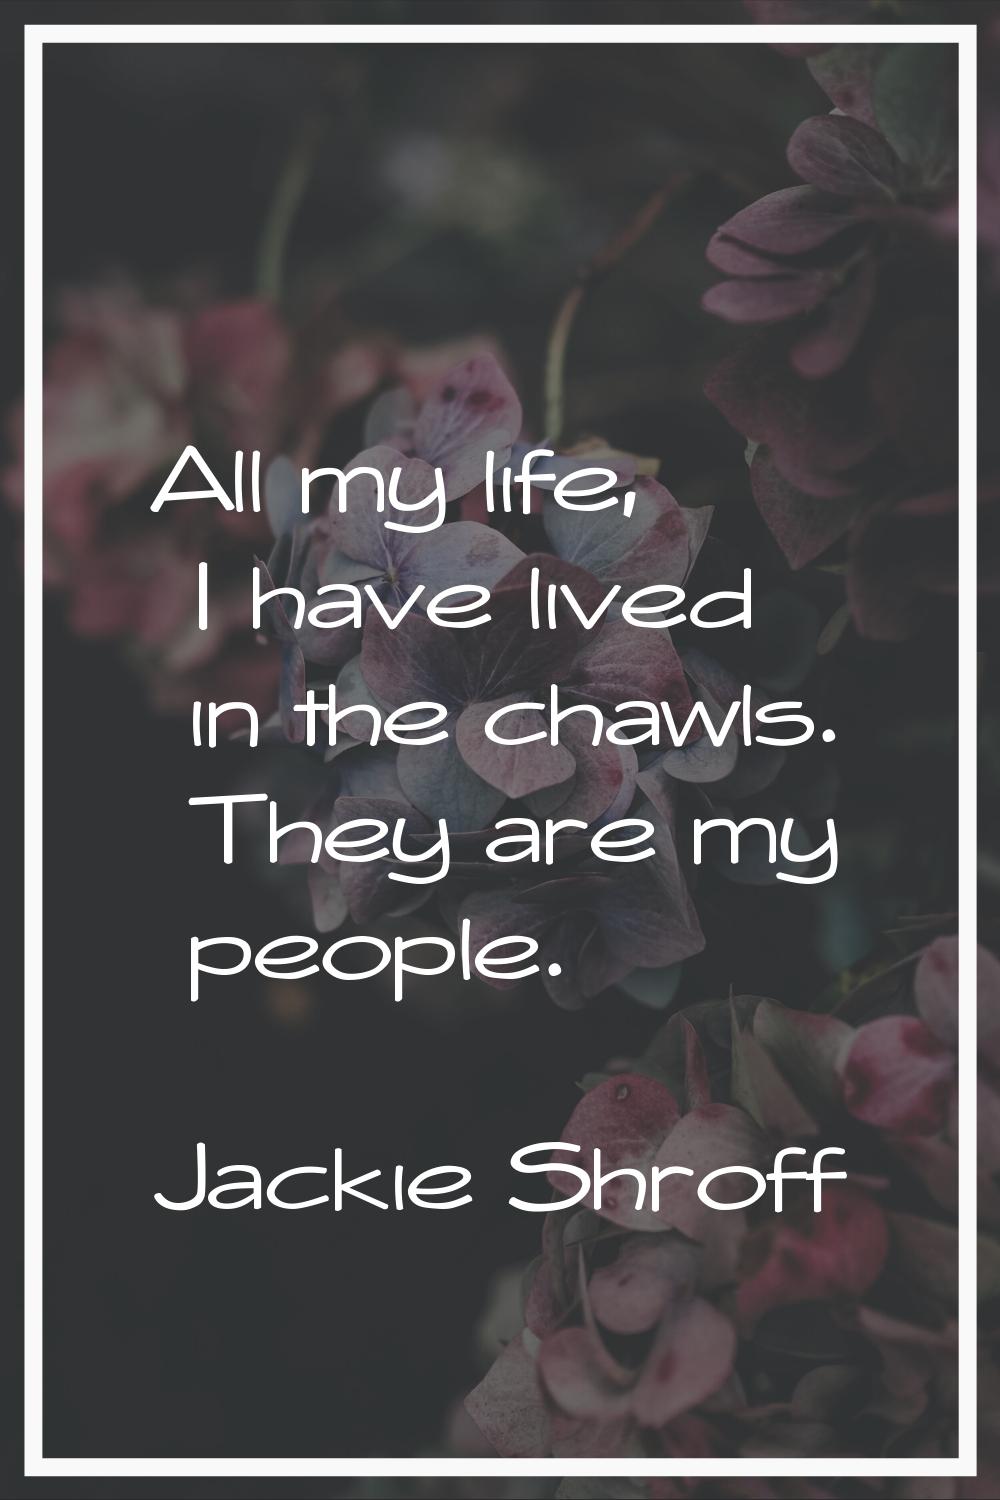 All my life, I have lived in the chawls. They are my people.